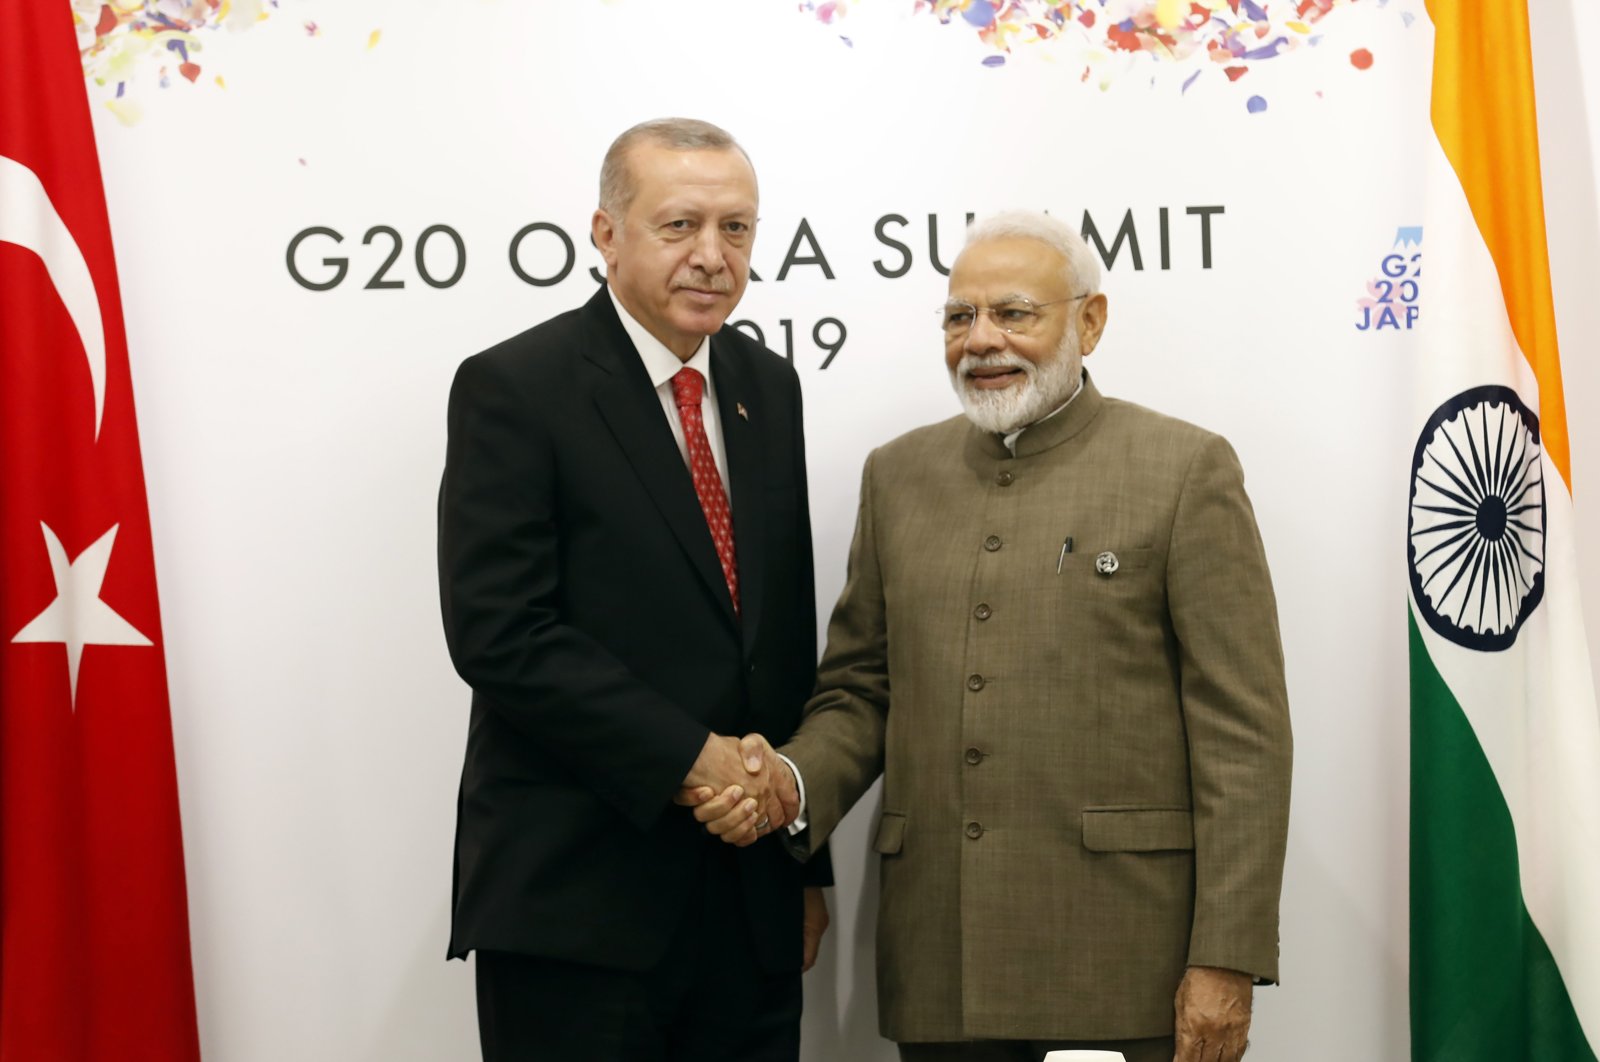 Turkey's President Recep Tayyip Erdoğan, left, shakes hands with India's Prime Minister Narendra Modi, right, prior to their meeting on the sidelines of the G-20 summit in Osaka, Japan, Saturday, June 29, 2019. (Presidential Press Service via AP, Pool)